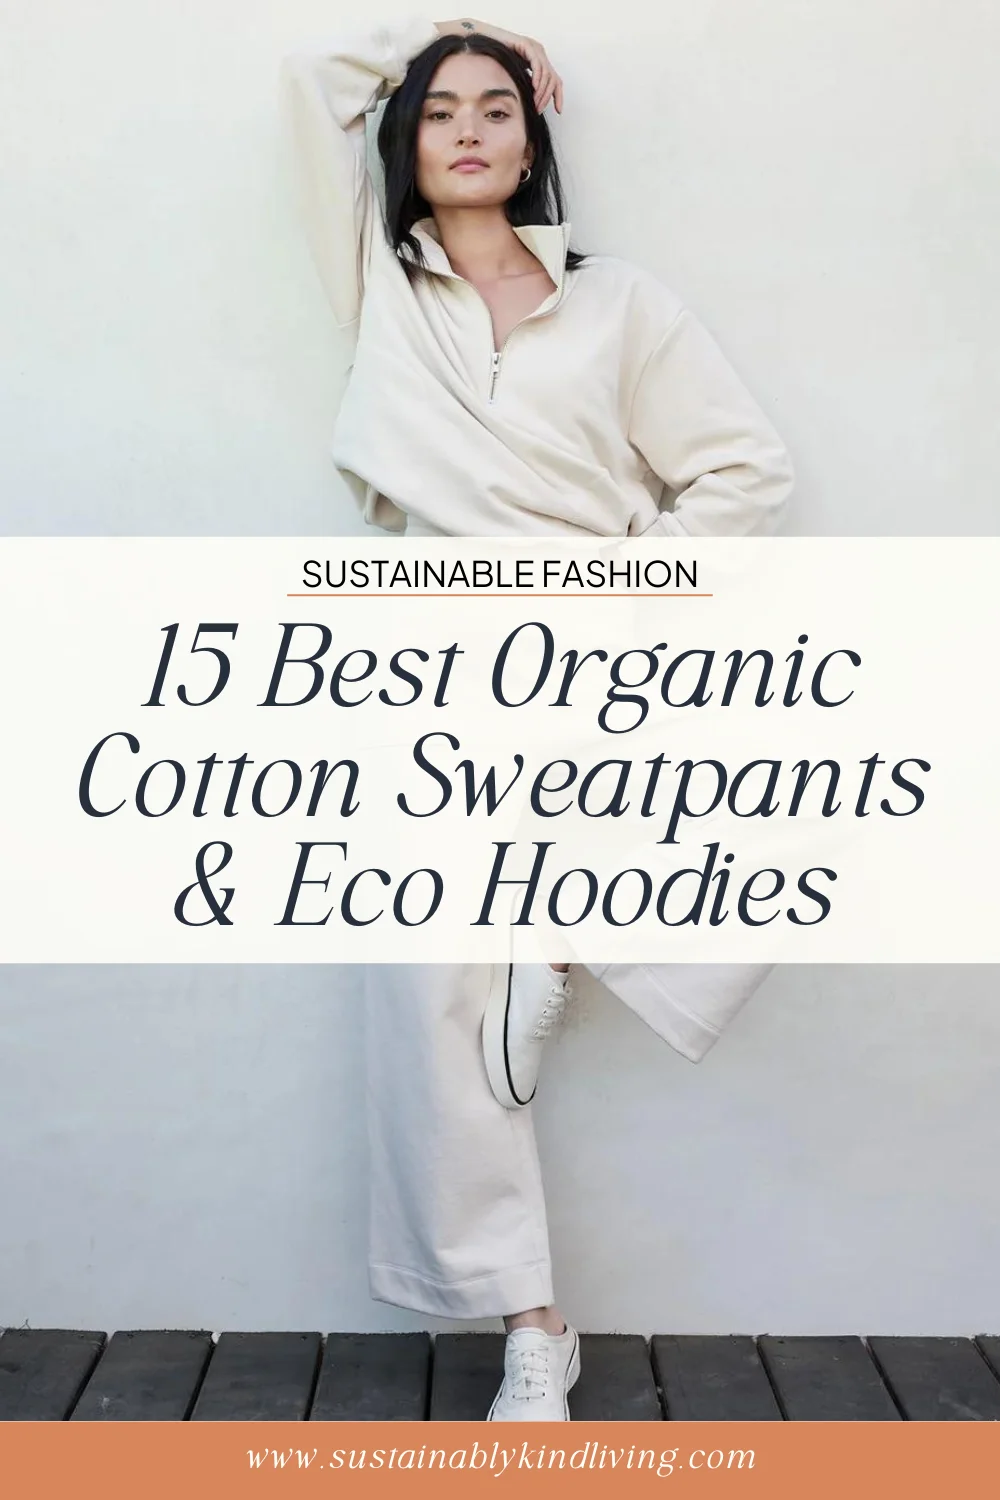 Top-rated eco-friendly sweats